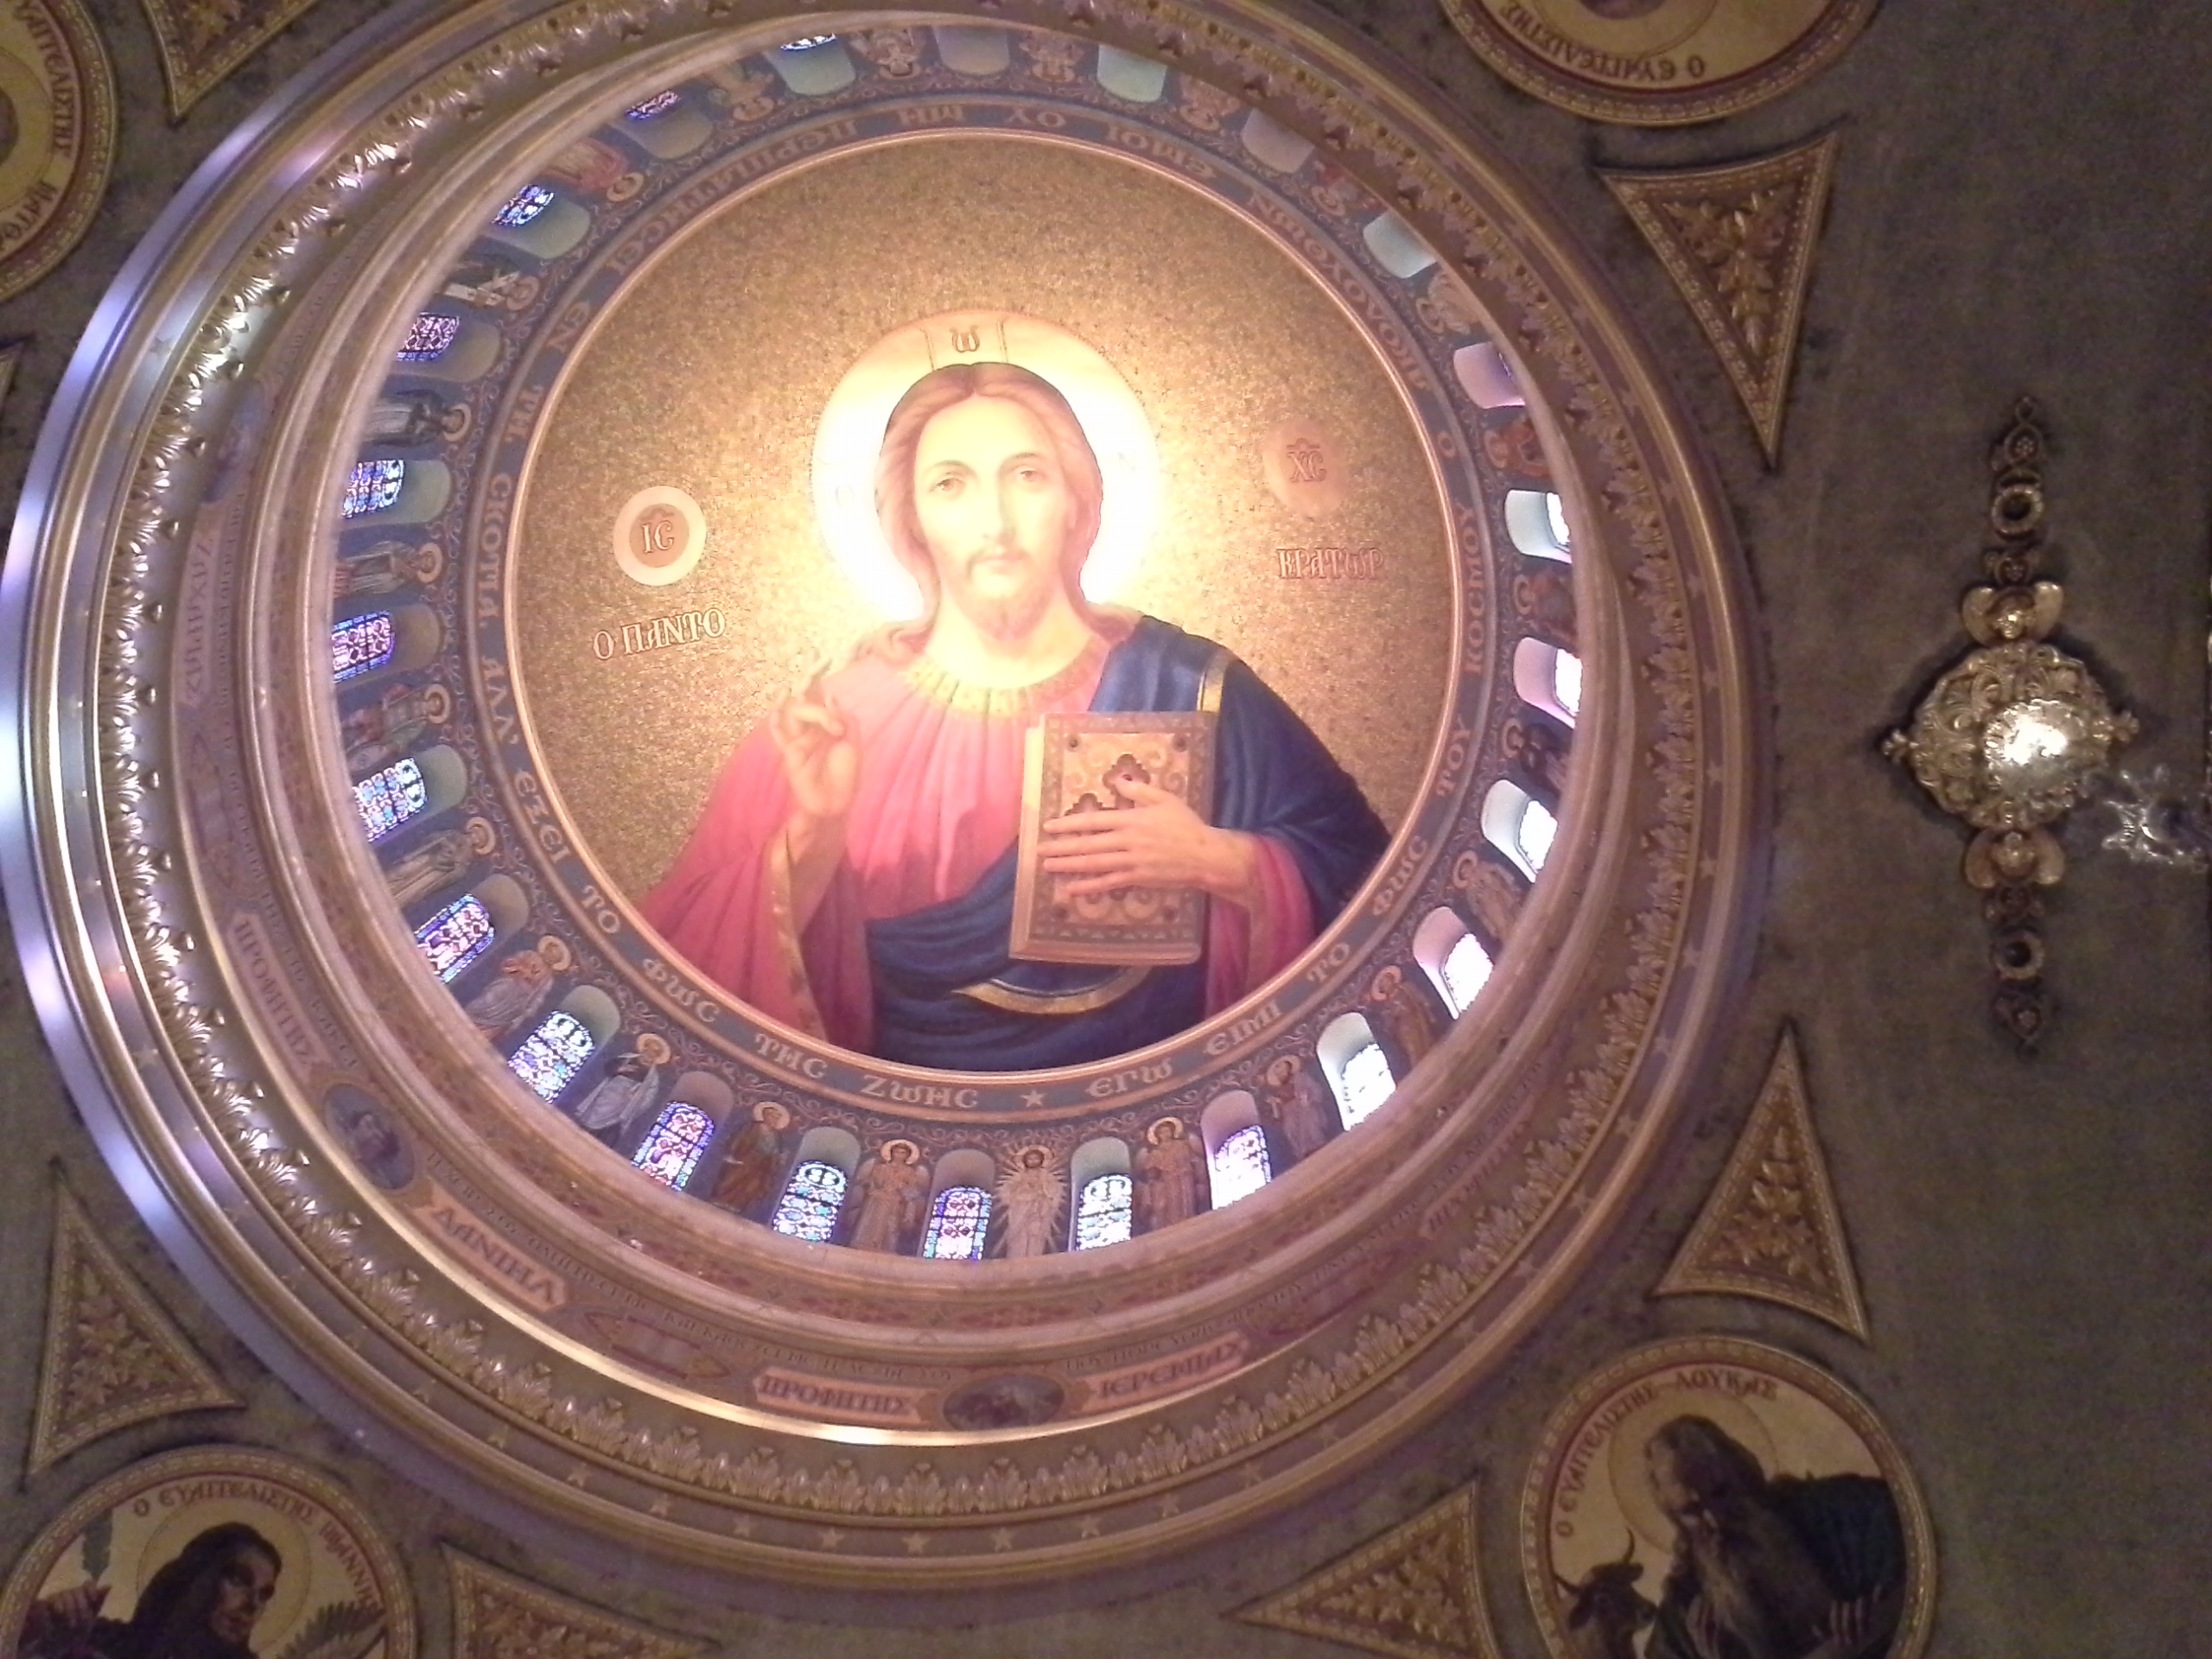 Saint Sophia Cathedral Blessings... Say a Prayer now. And hug the next person you know, giving them confidence. Amen, save a friend